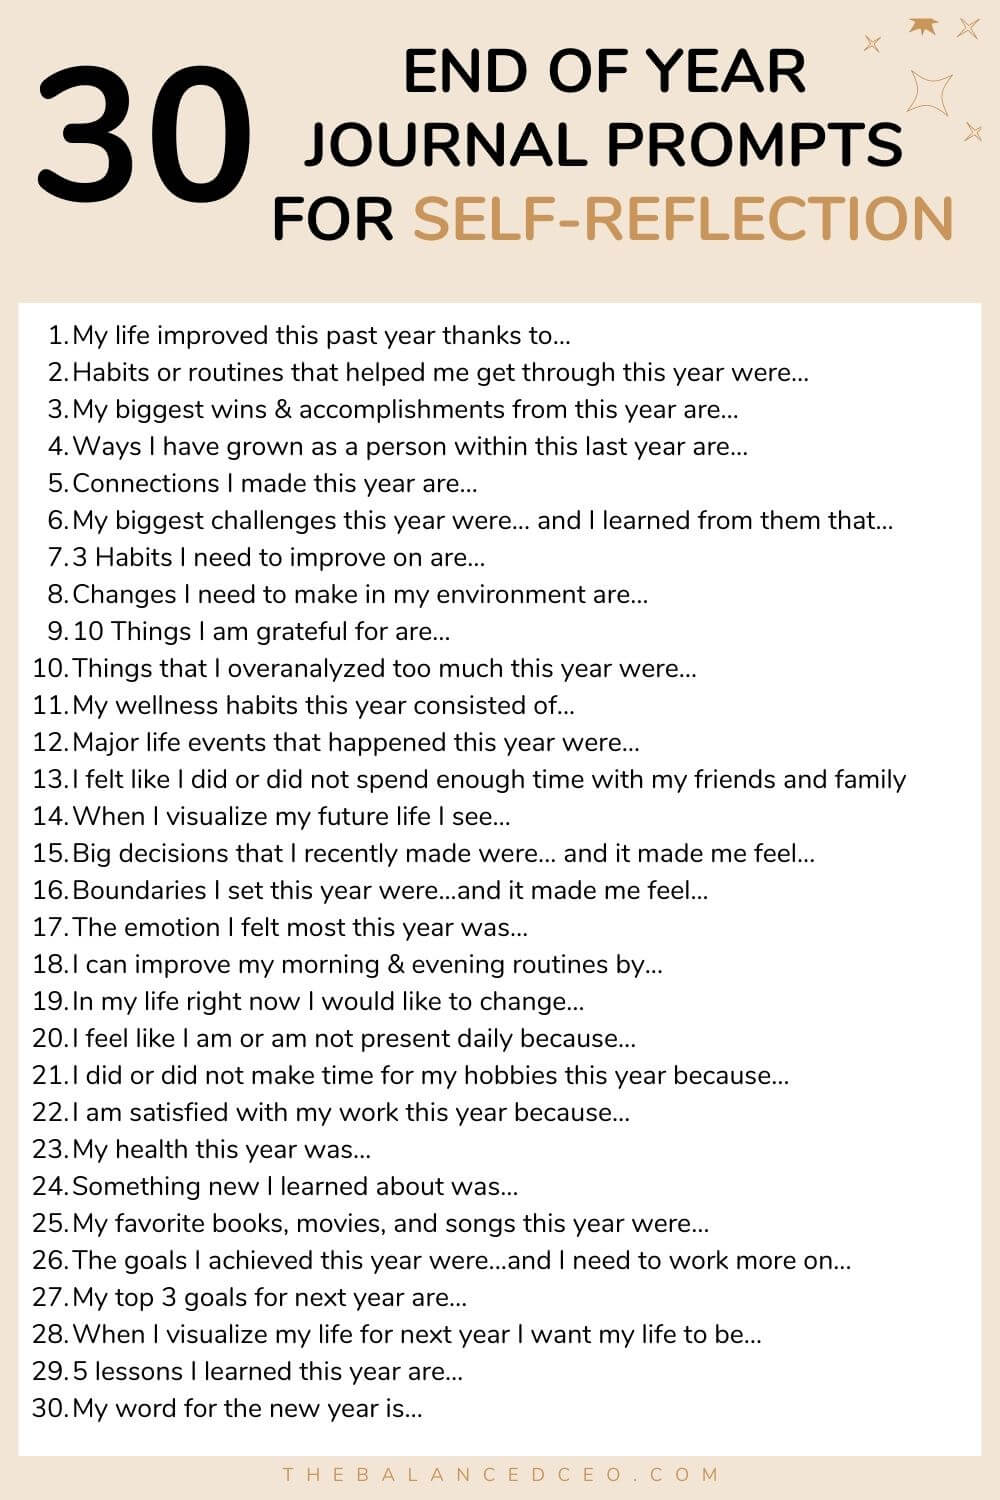 30 End of Year Journal Prompts for Self-Reflection - The Balanced CEO